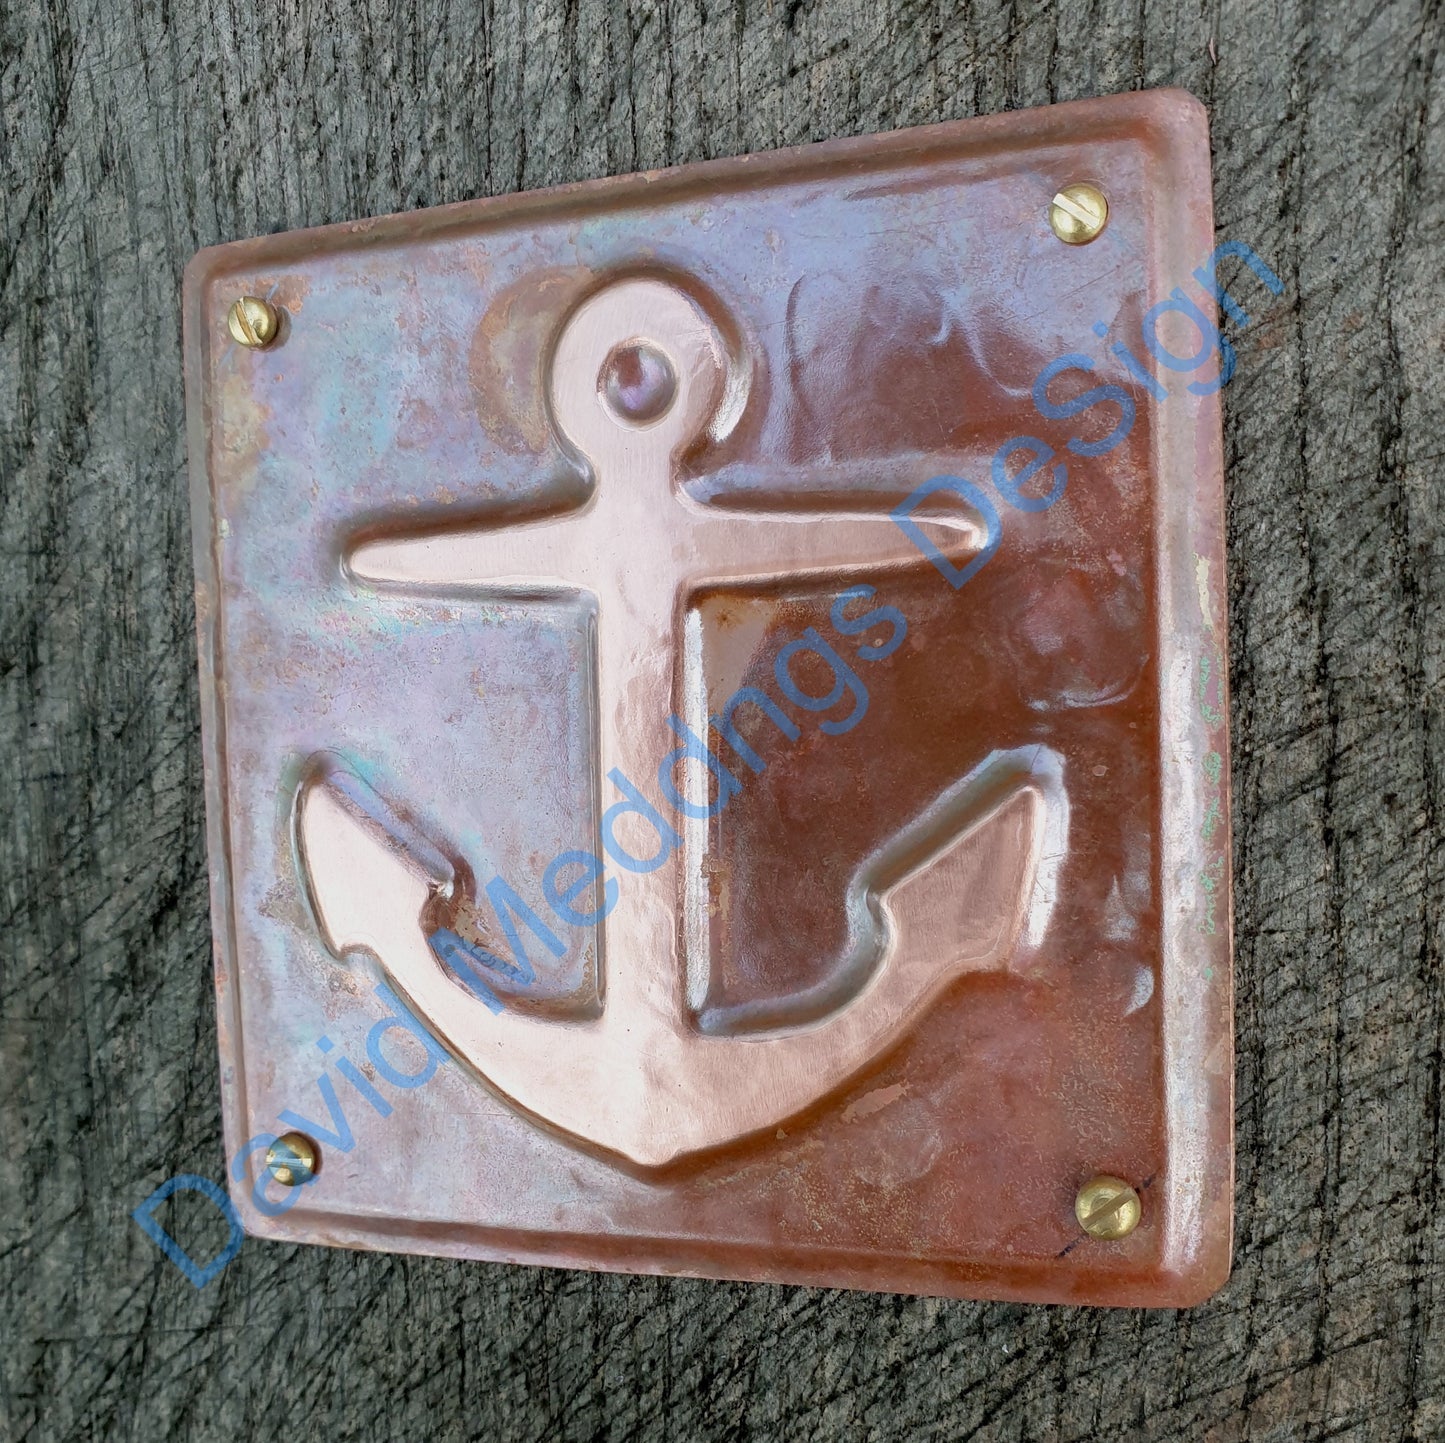 Anchor ship nautical copper sailing  plaque gift, hammered or patinated  3.5 x 3.25"/90x80mm tx